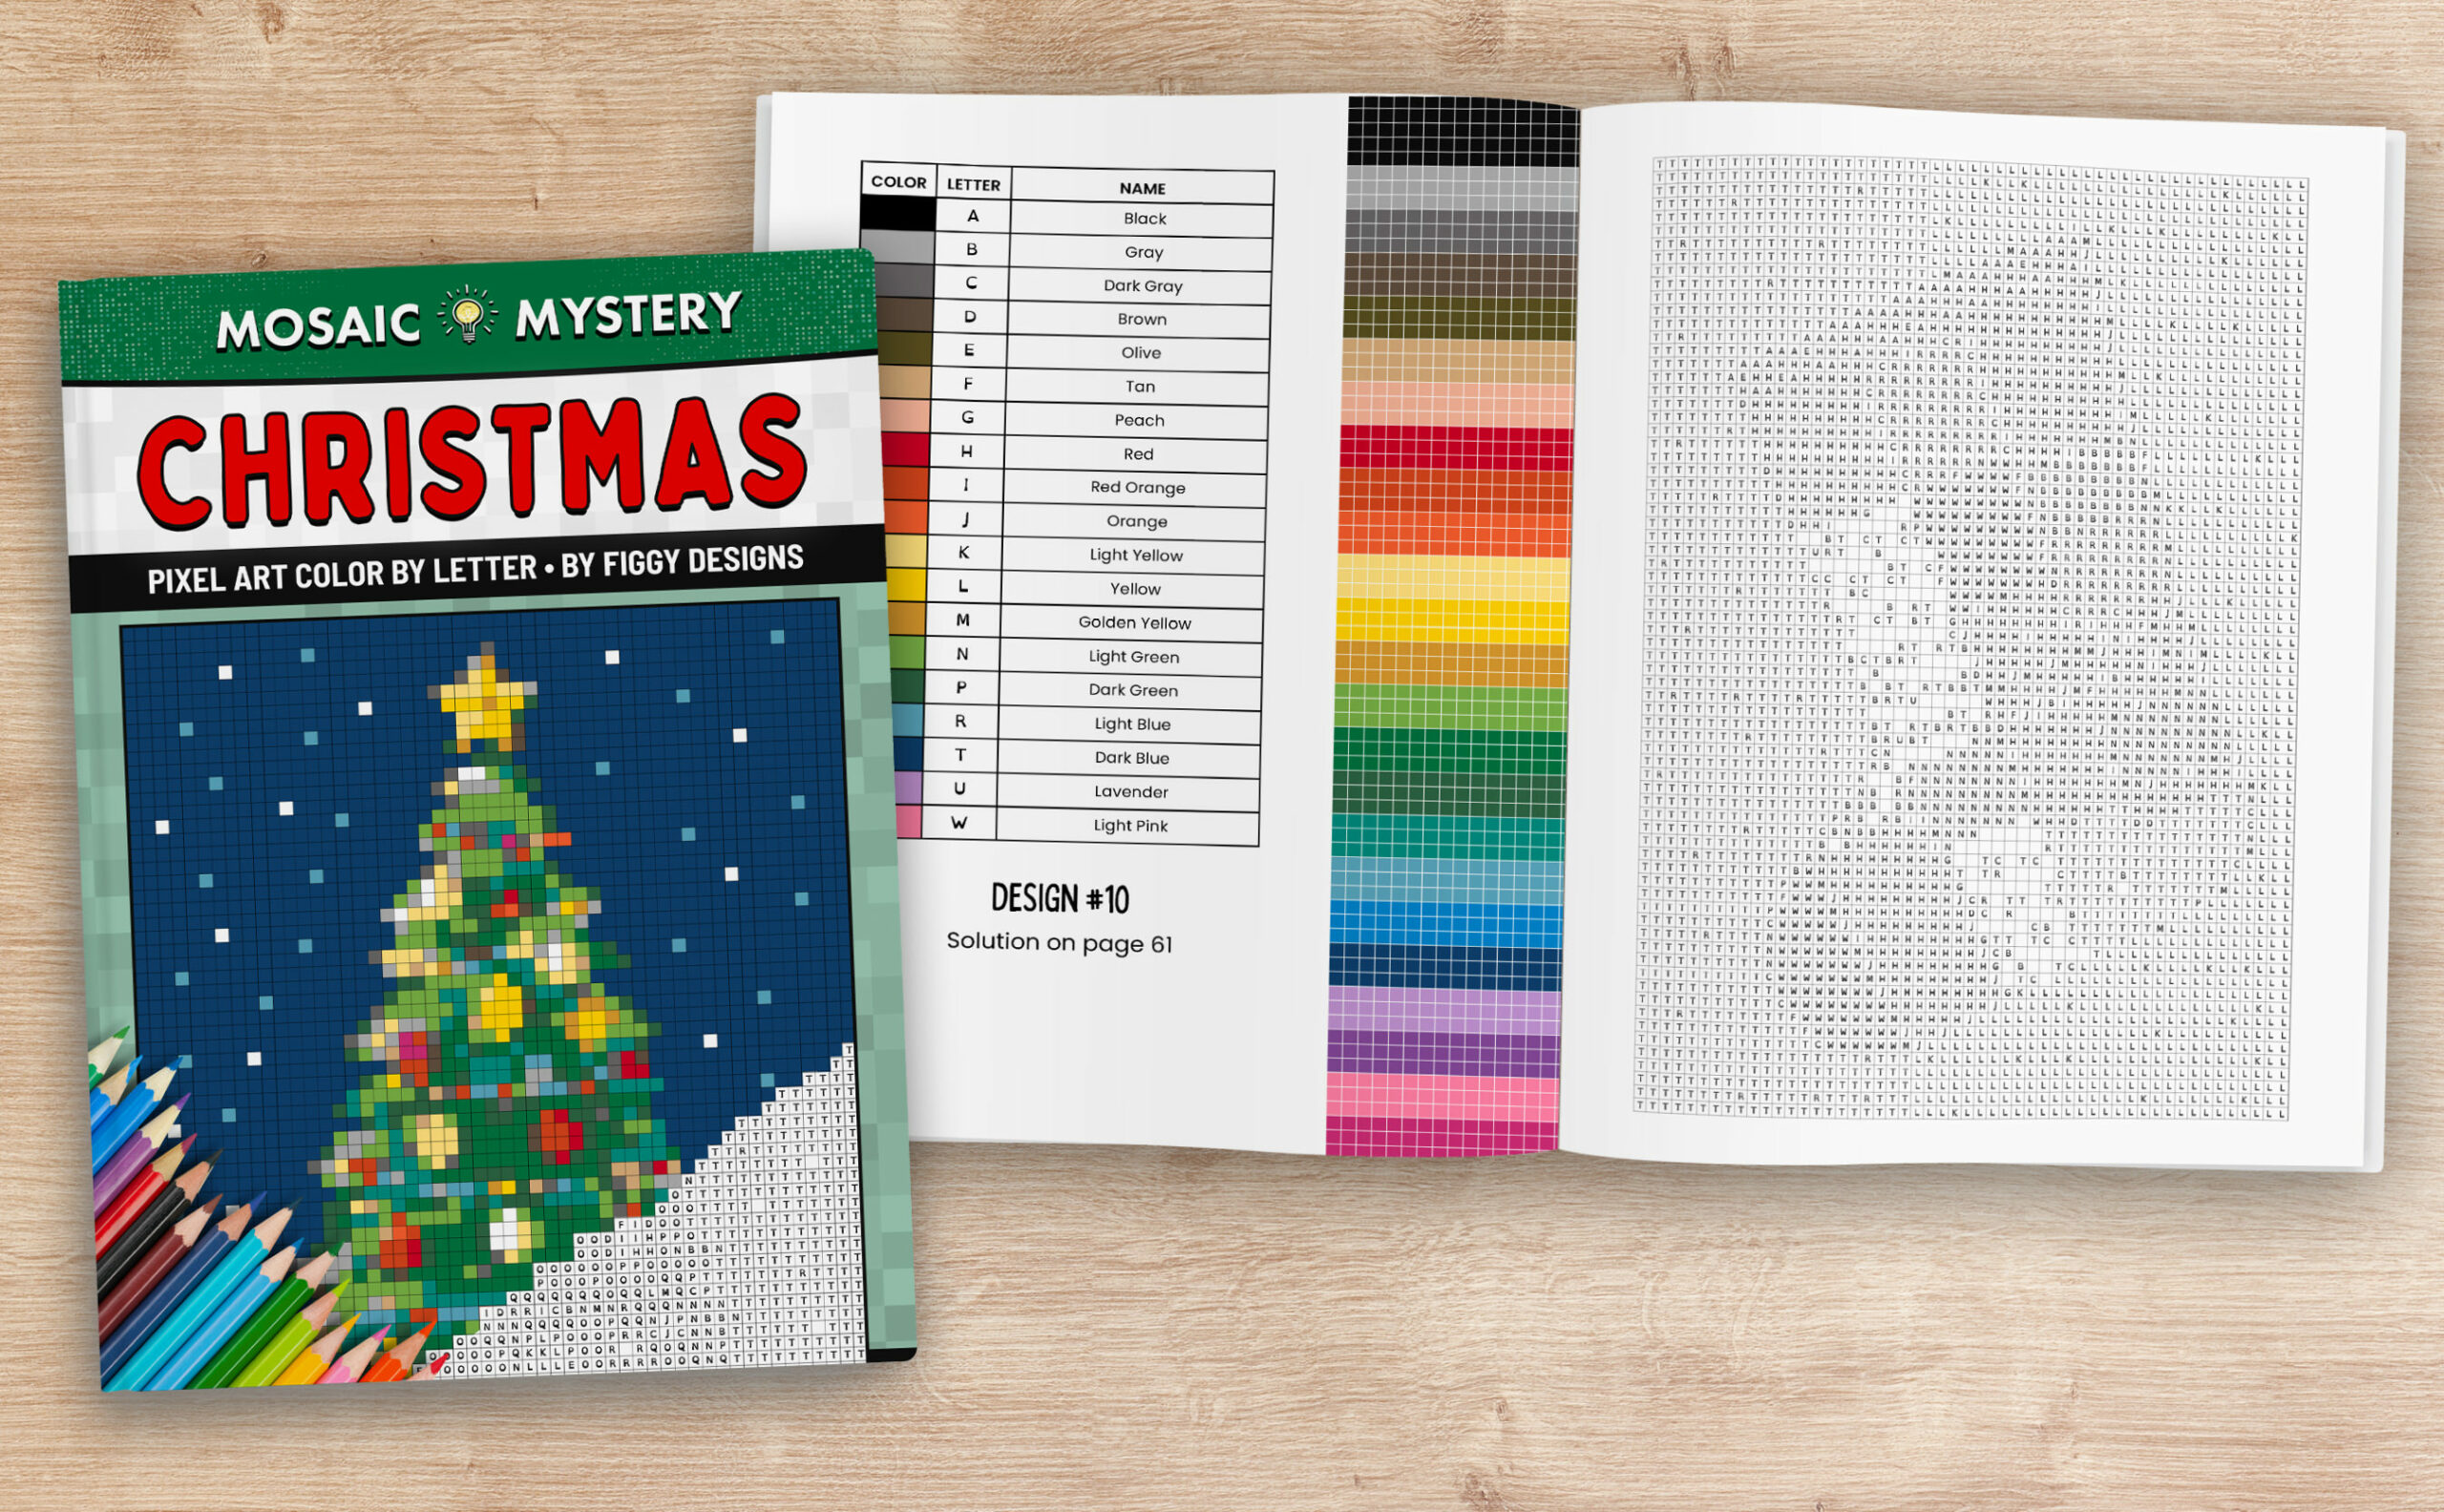 Mosaic Mystery: Christmas — Pixel art color by letter